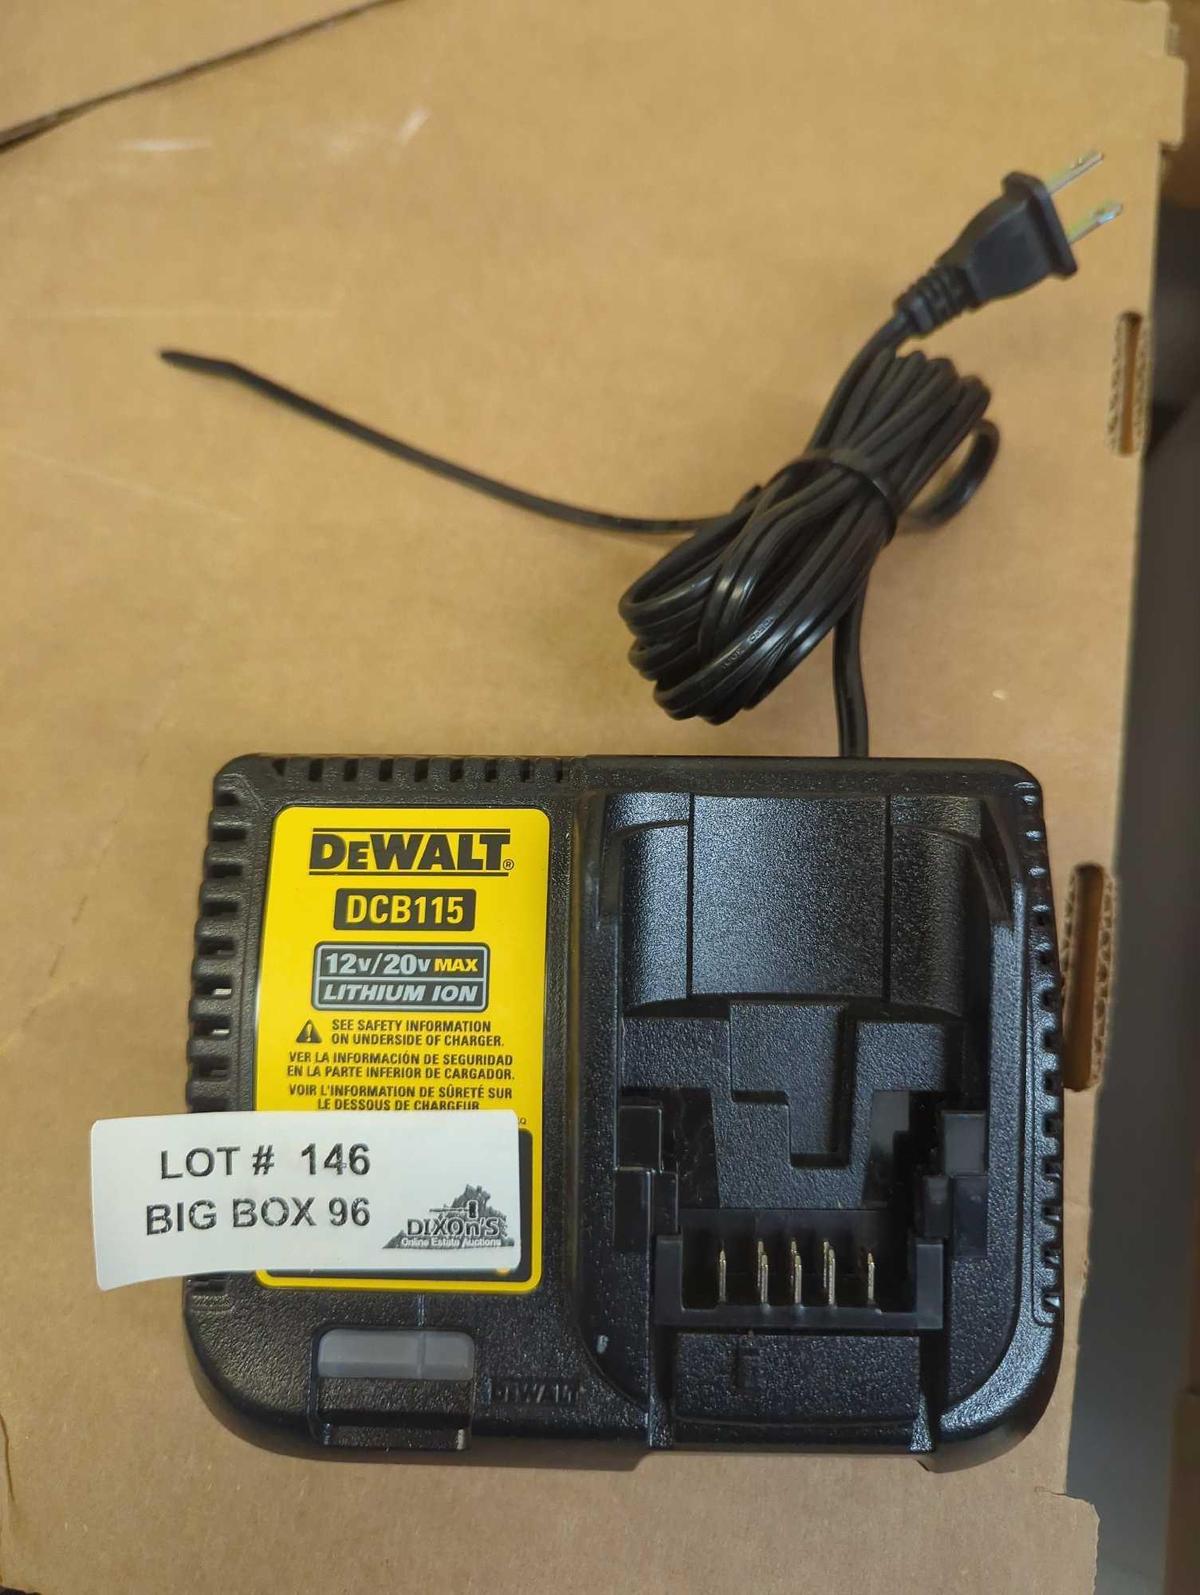 DEWALT 12V to 20V Lithium-Ion Battery Charger, Model DCB115, Retail Price $89, Appears to be Used,